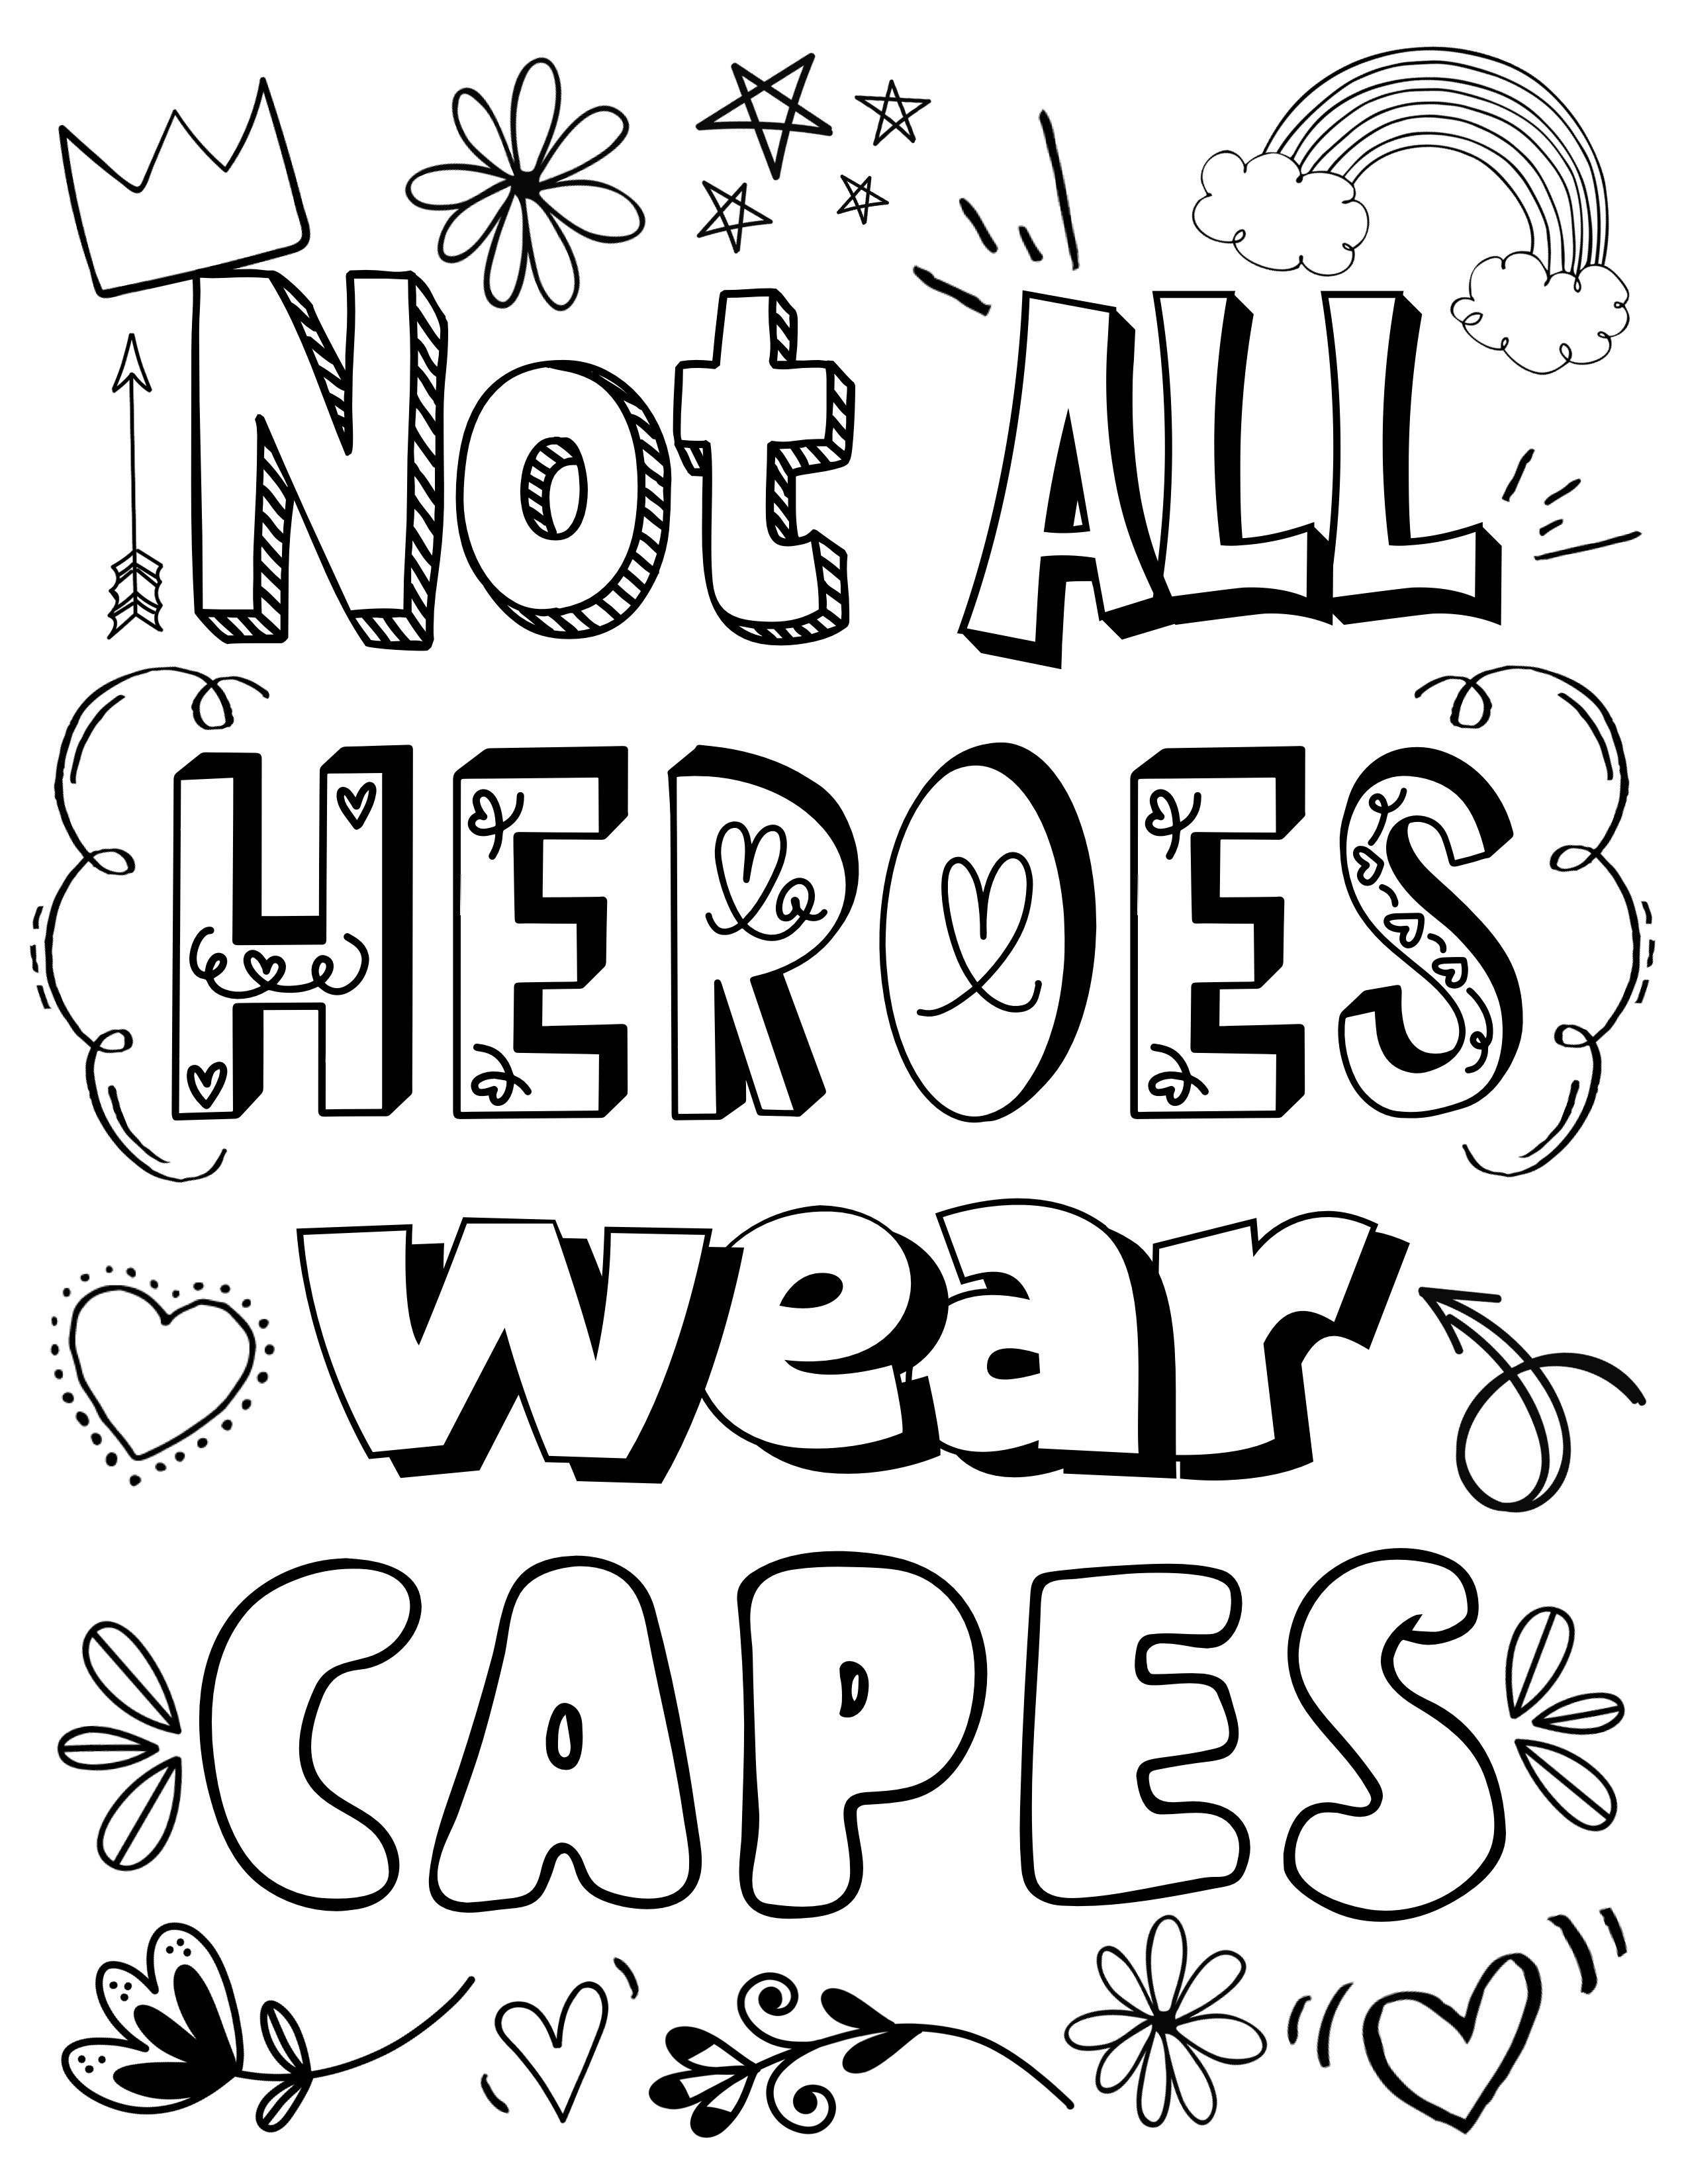 Not all heroes wear capes free coloring page